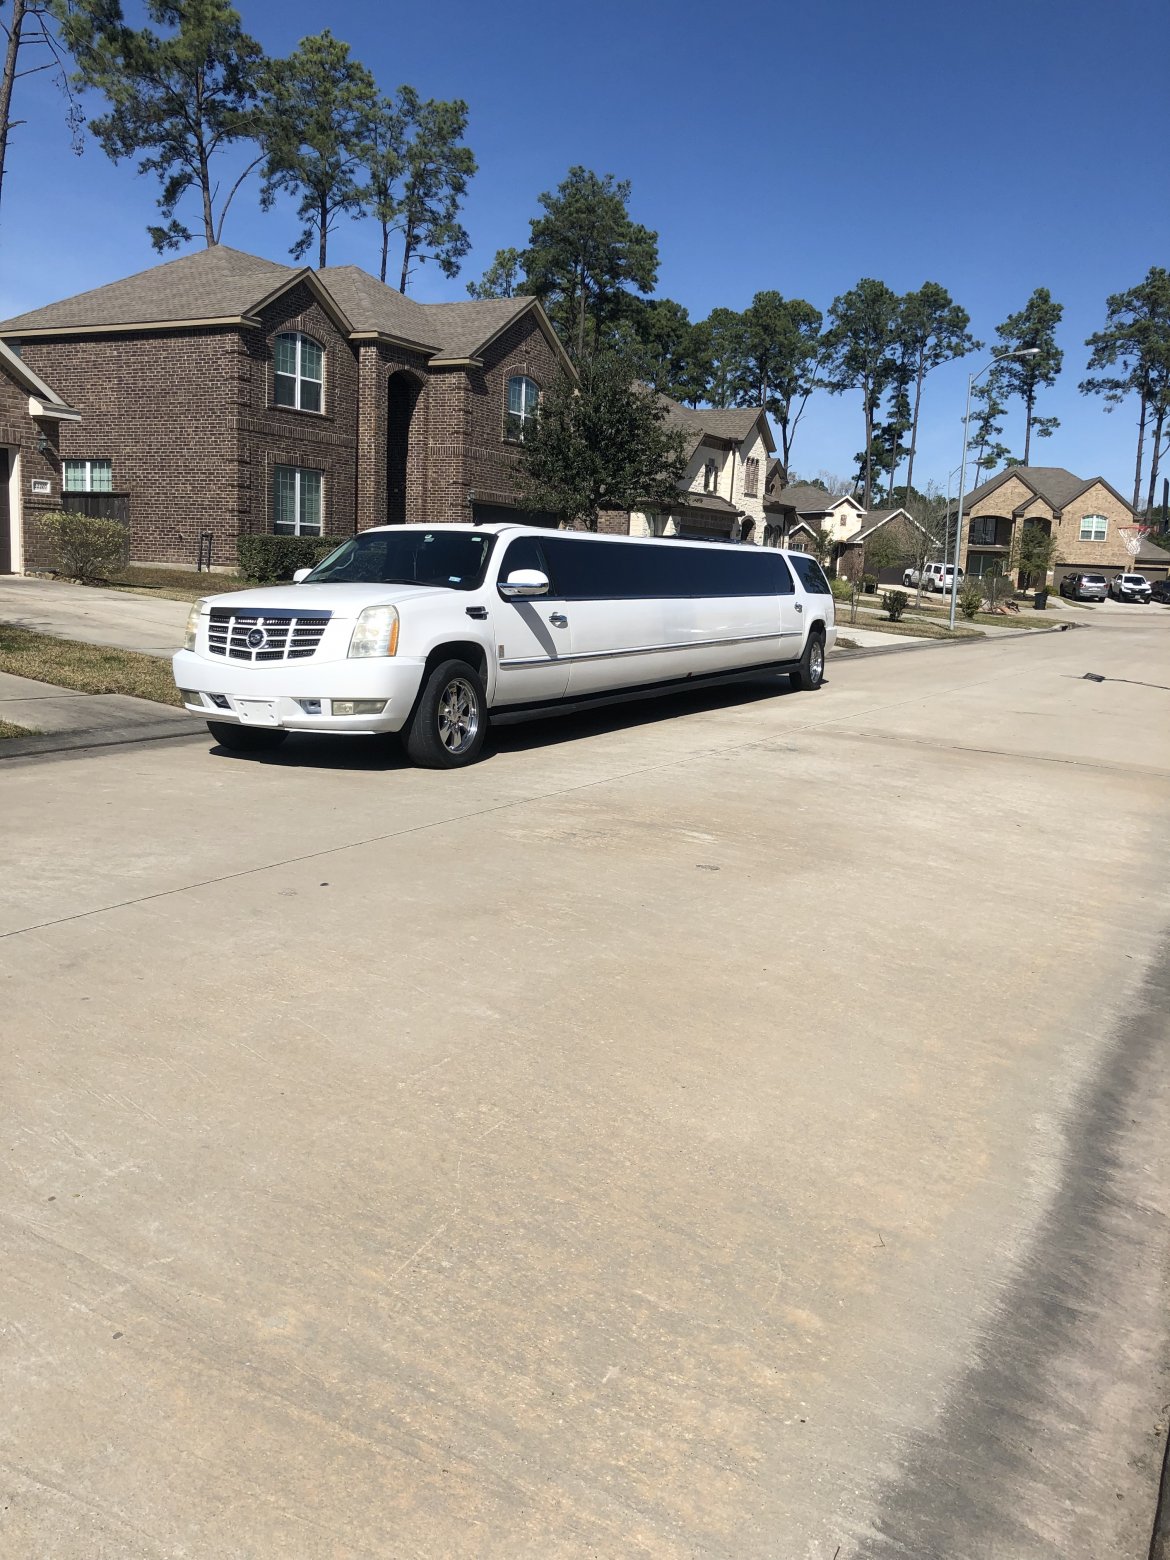 Limousine for sale: 2007 Cadillac Escalade ESV 200&quot; by Pinecule